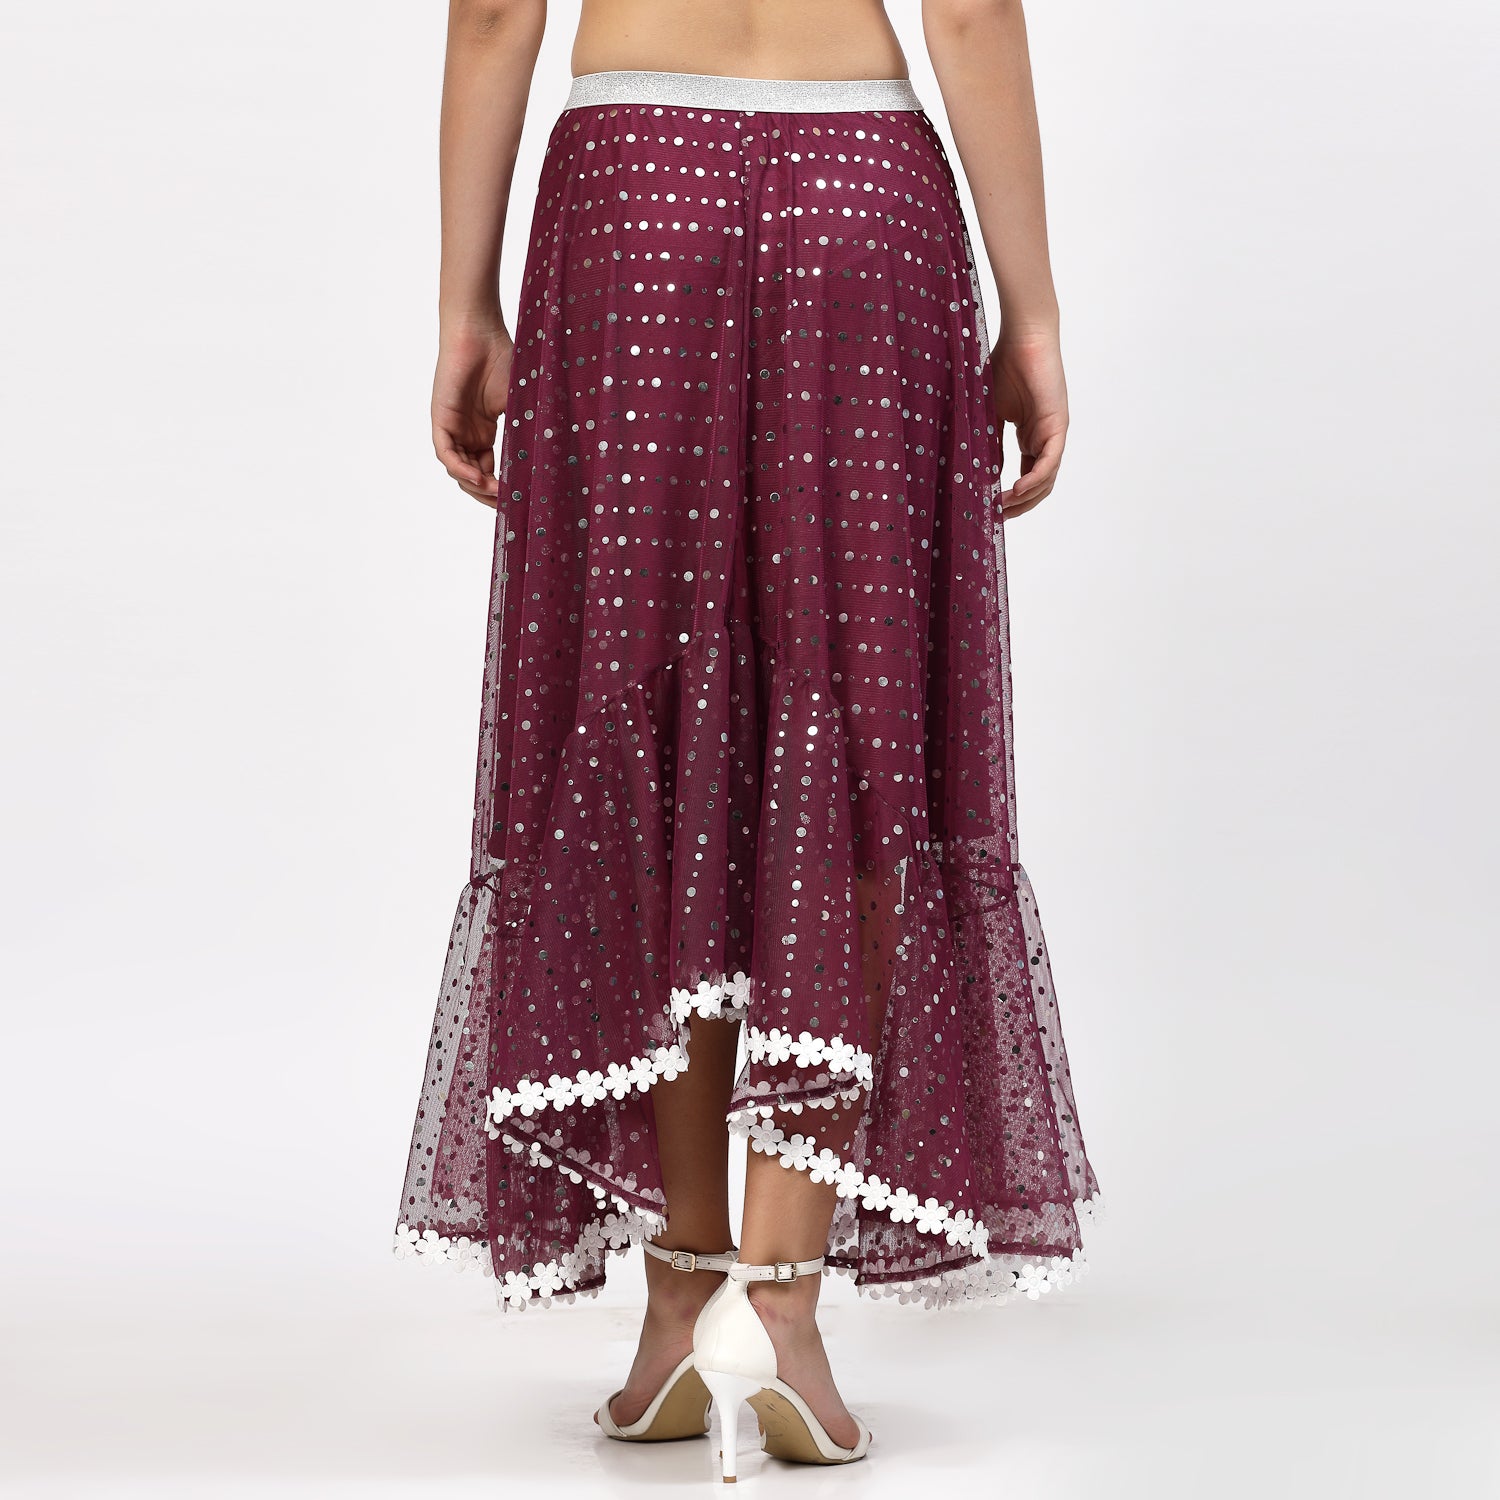 Purple Net Asymmetrical Skirt With Sequins And Lace